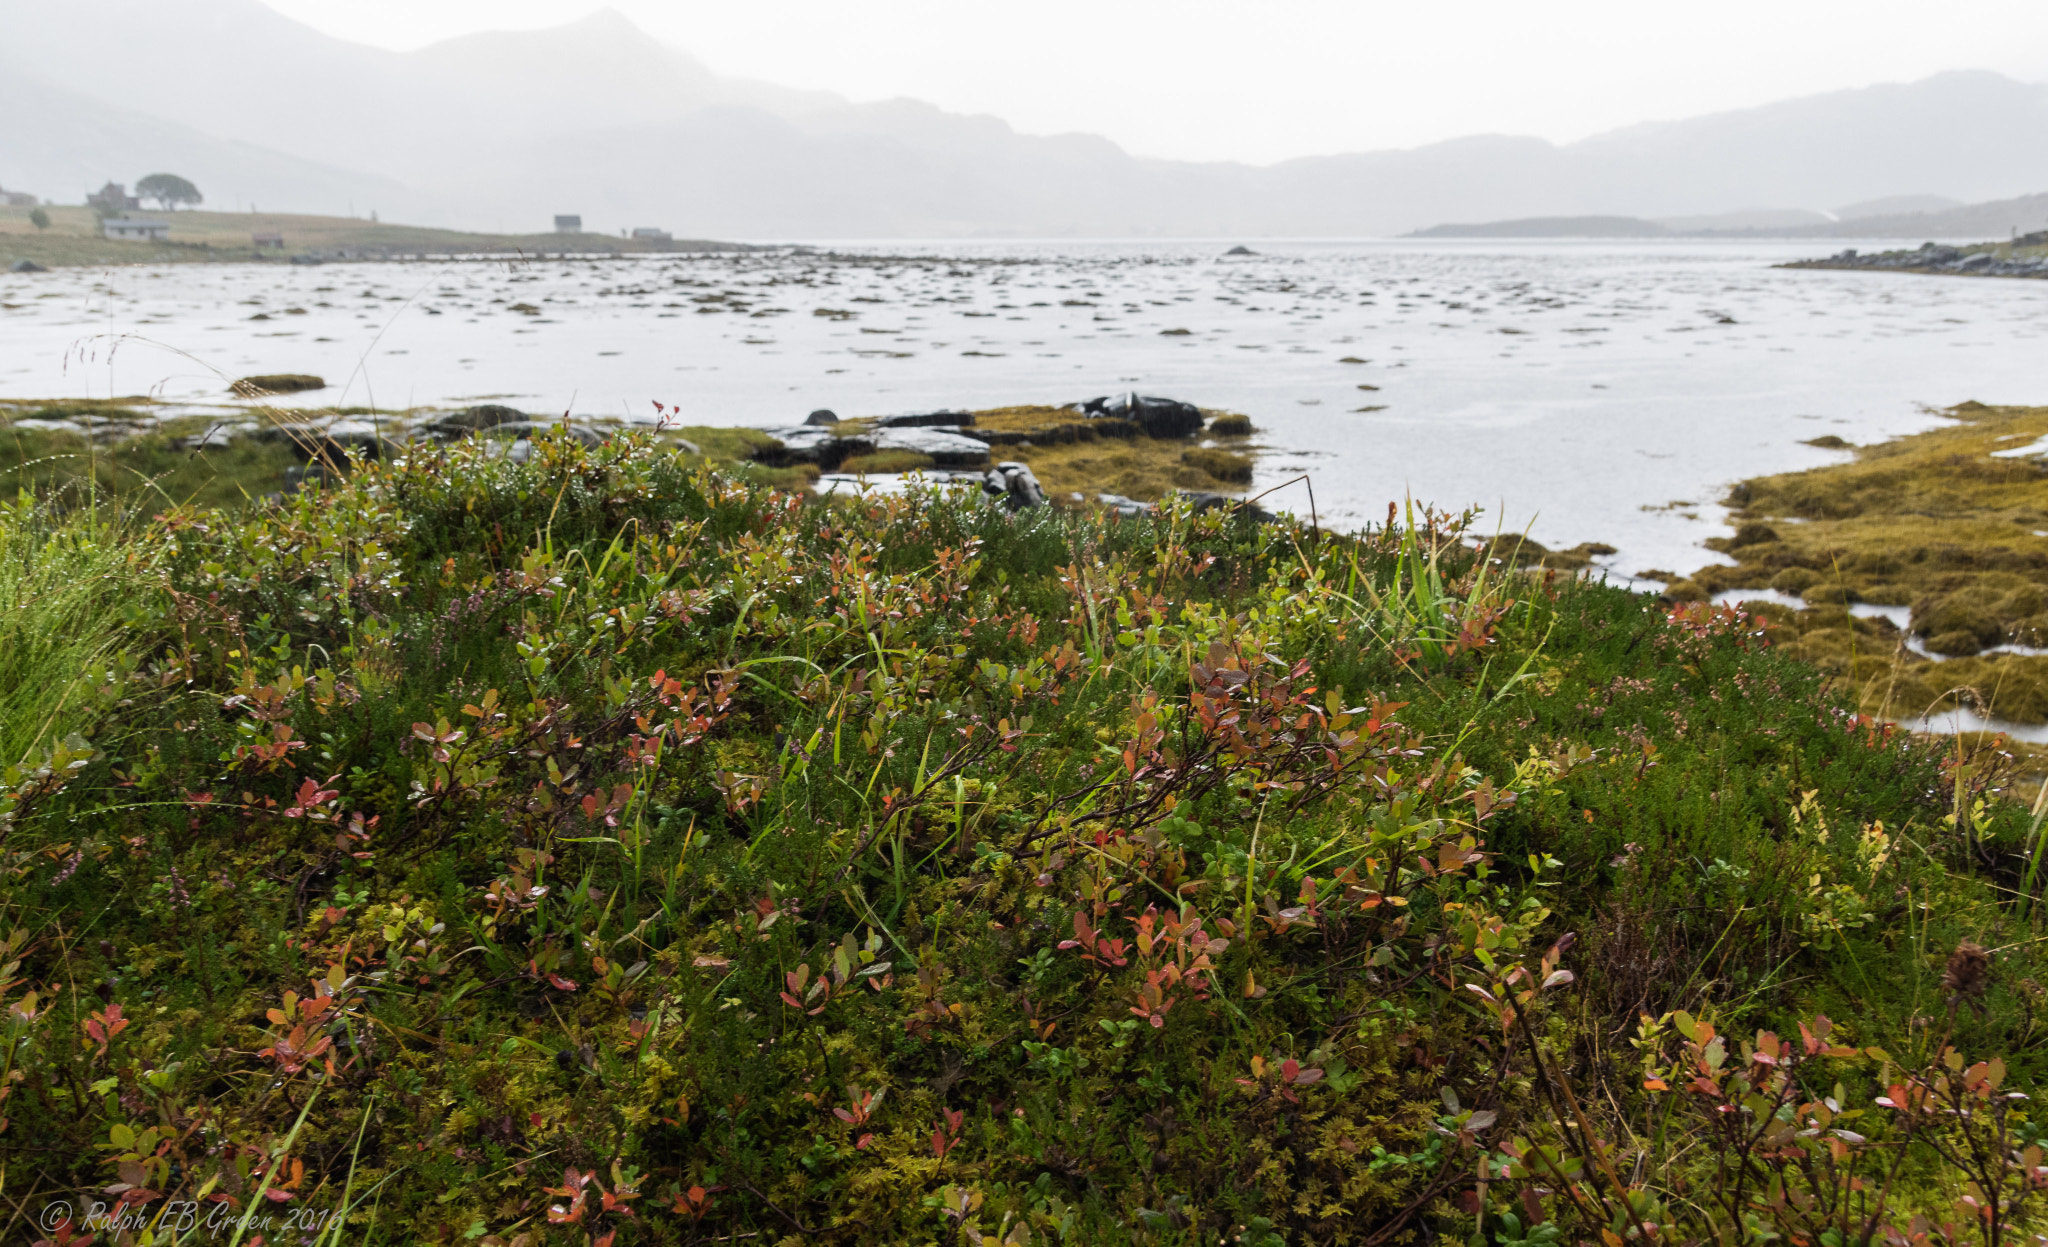 Pentax K-3 II sample photo. A wet and grey day on lofoten photography